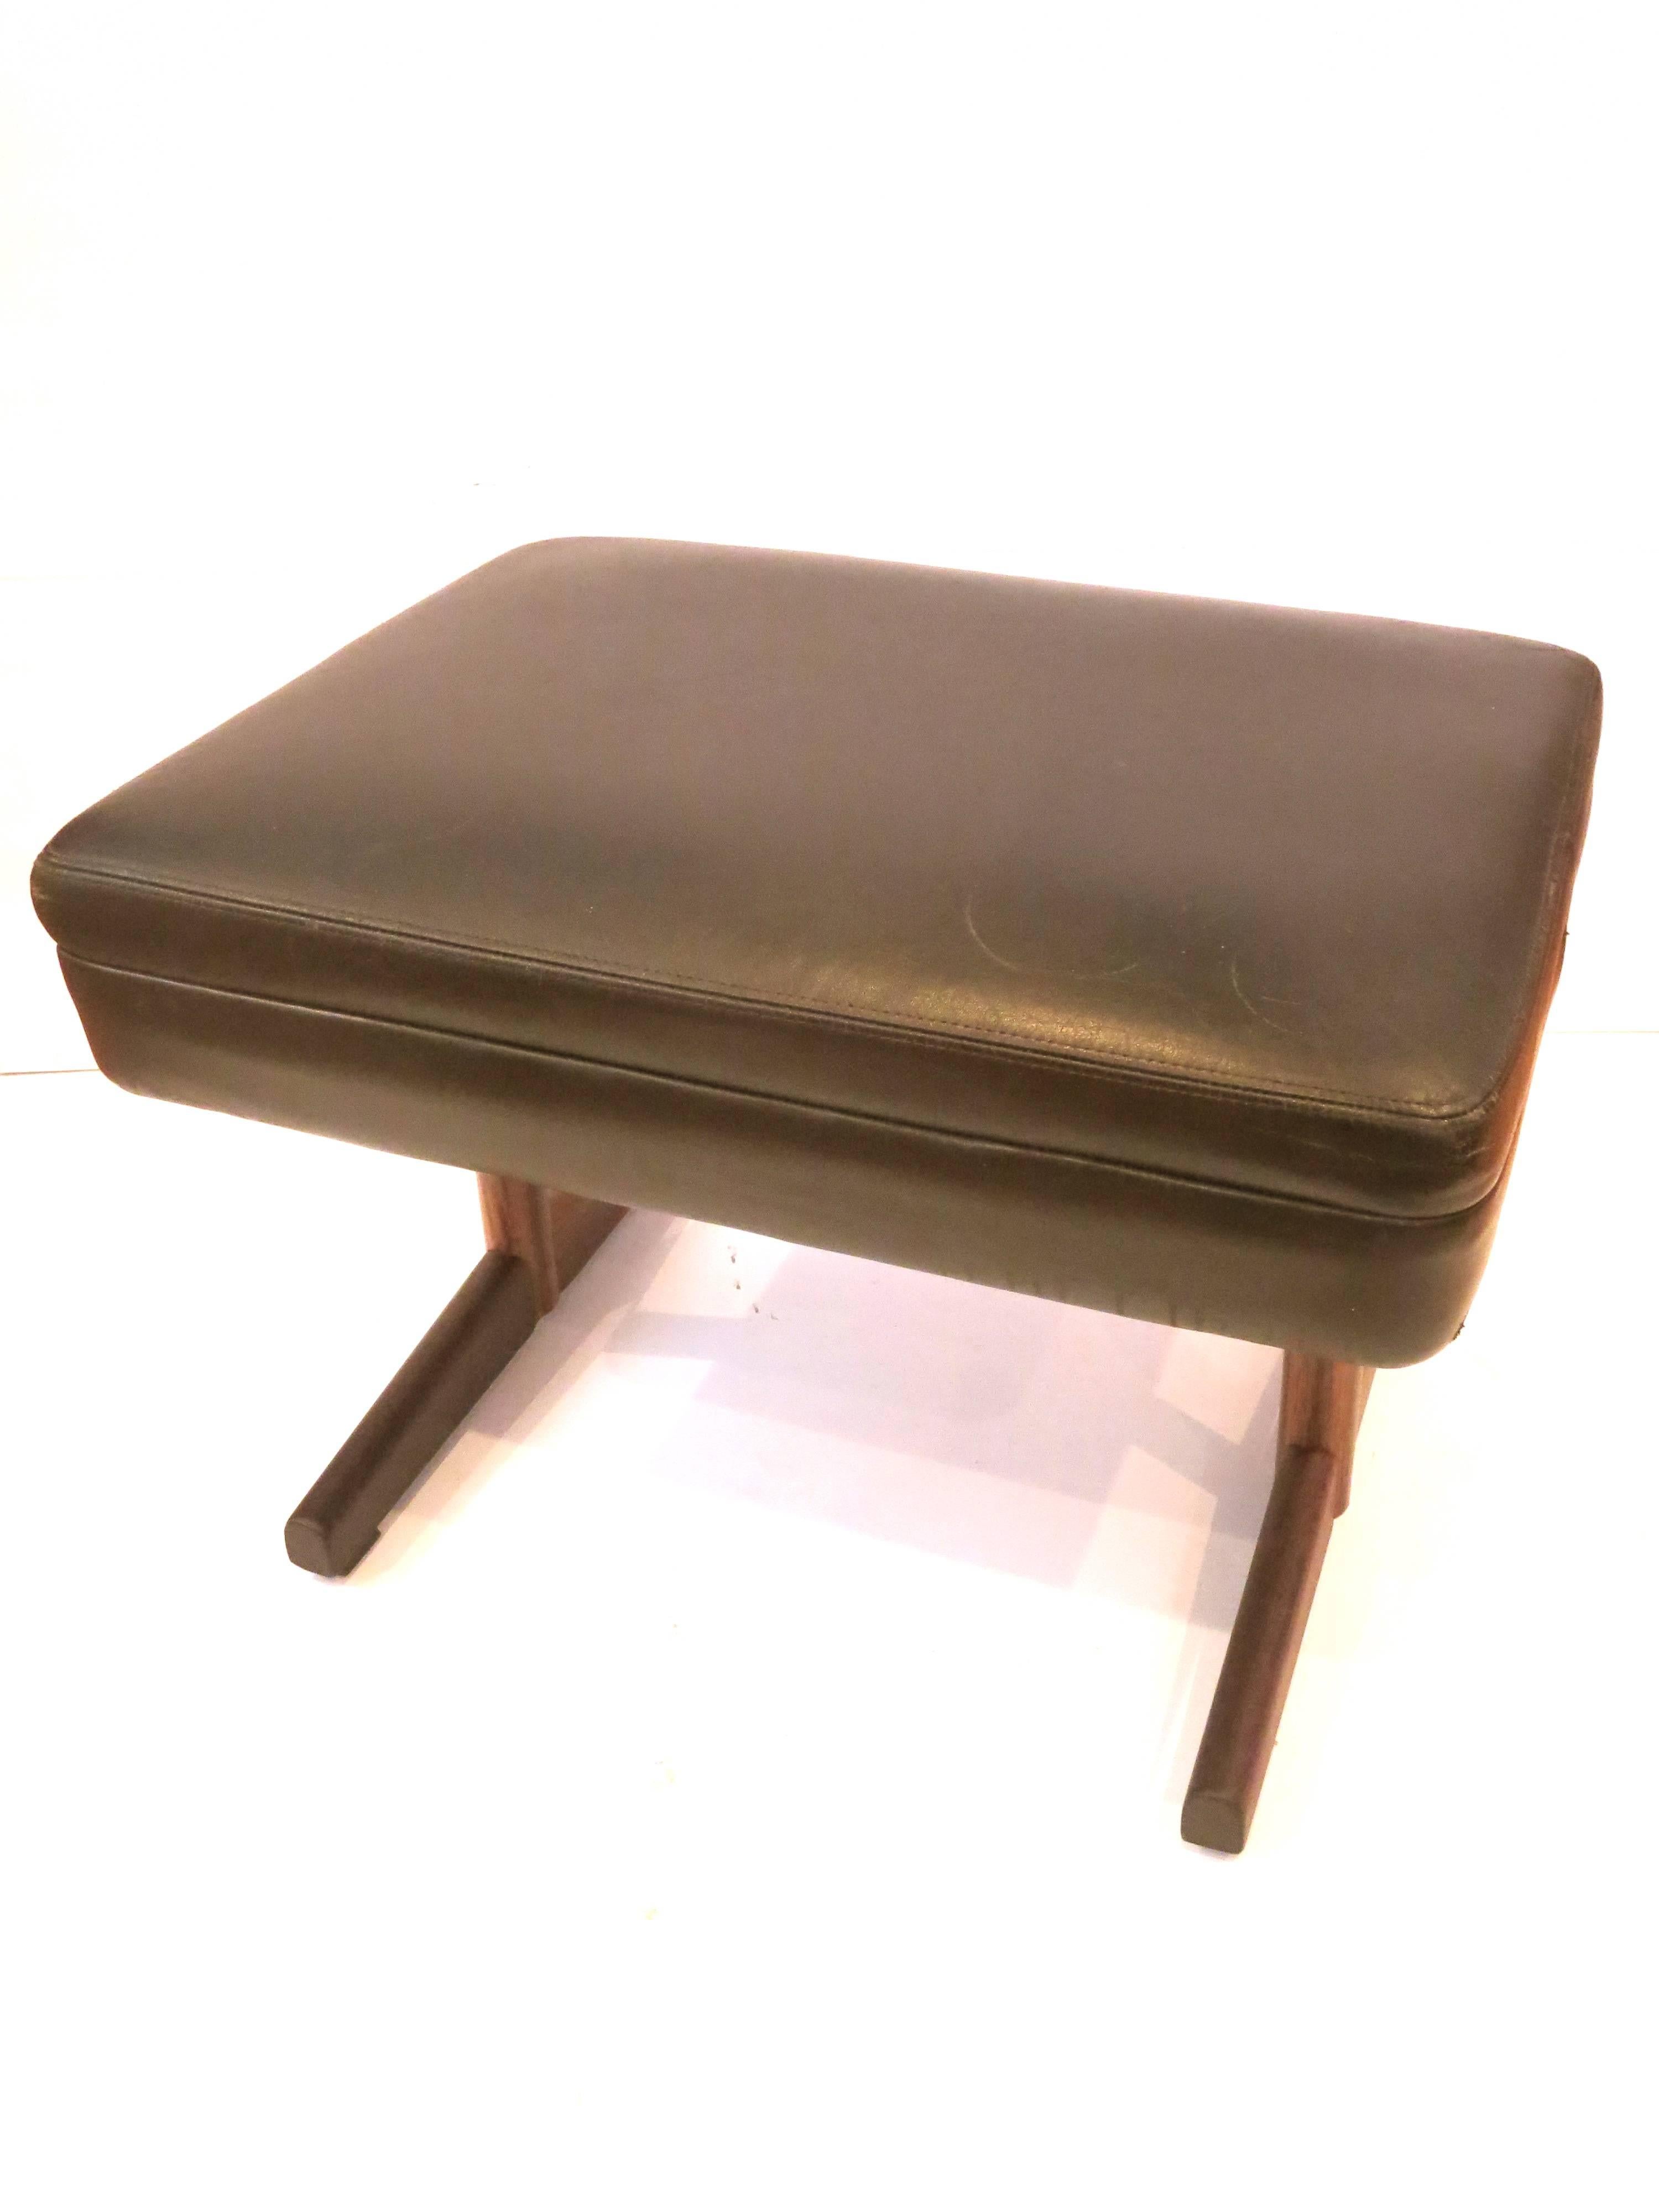 Simple elegant original black leather stool or ottoman, circa 1950s hand-stitched leather top with solid rosewood base great original condition the base has been light sanded and oiled, solid and sturdy with iron attachments.